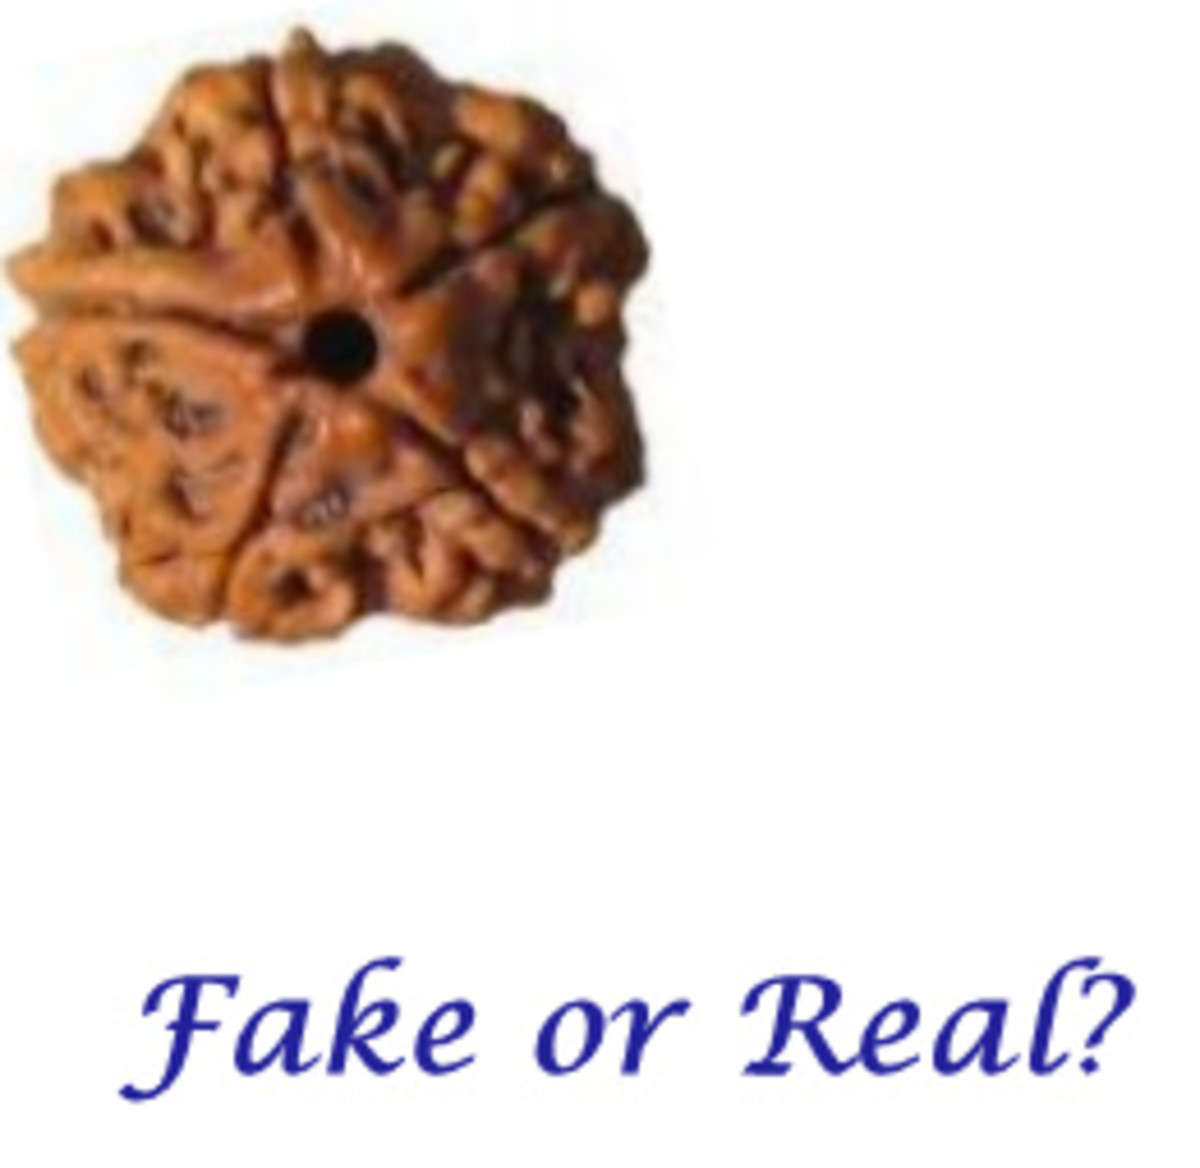 How to find if a Rudraksha Bead is Genuine or Fake? There are Tests to check the authenticity of Rudraksha beads. 